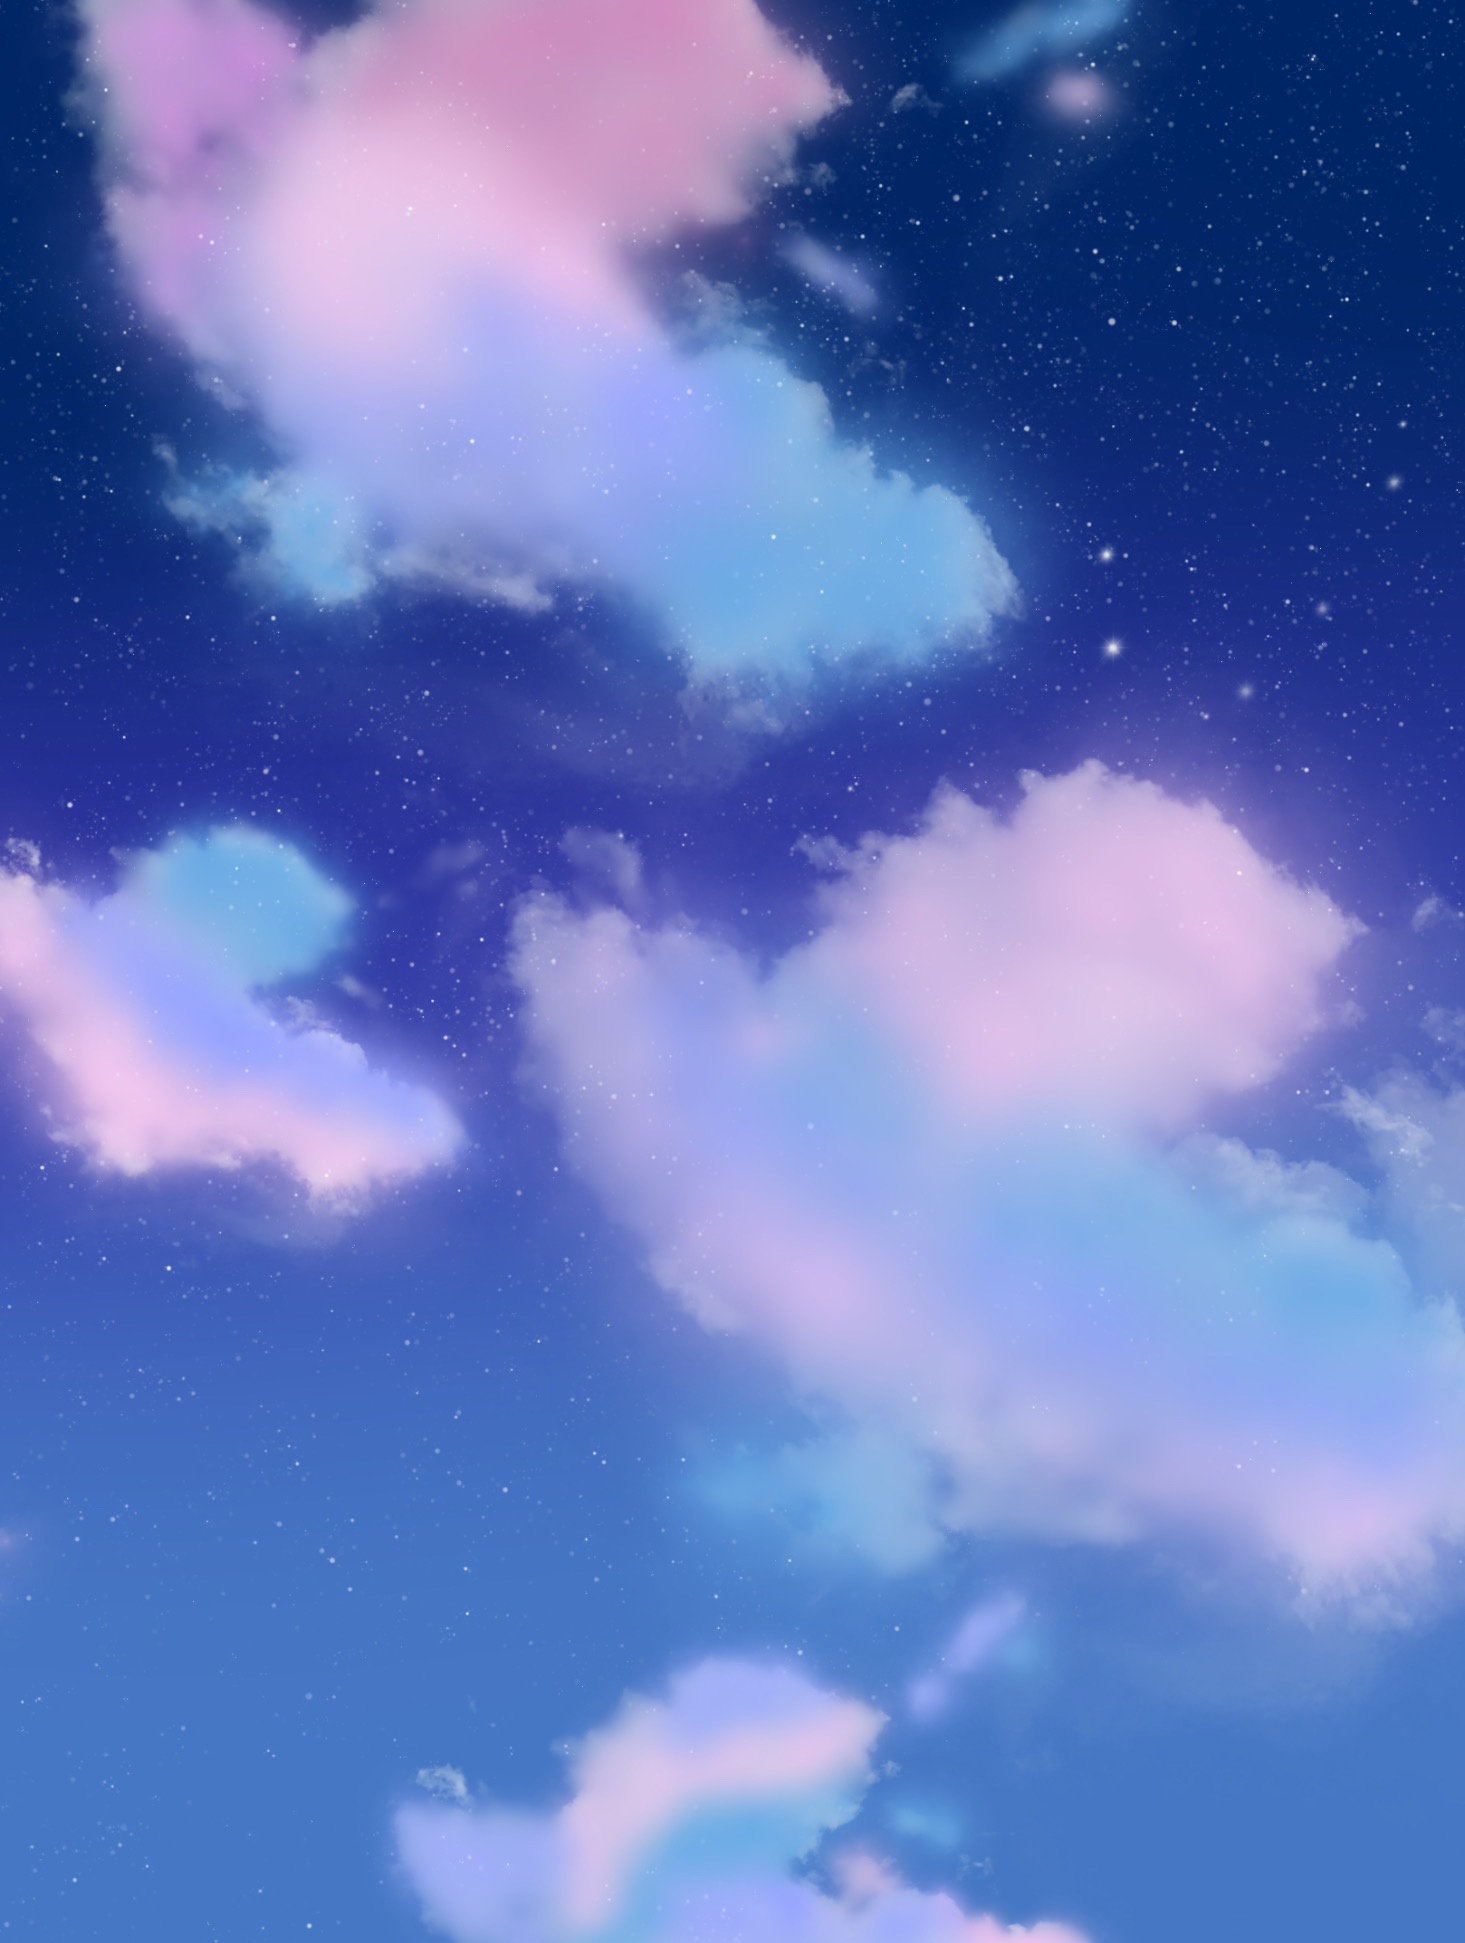 Cotton candy sky by KittyChan143 on DeviantArt